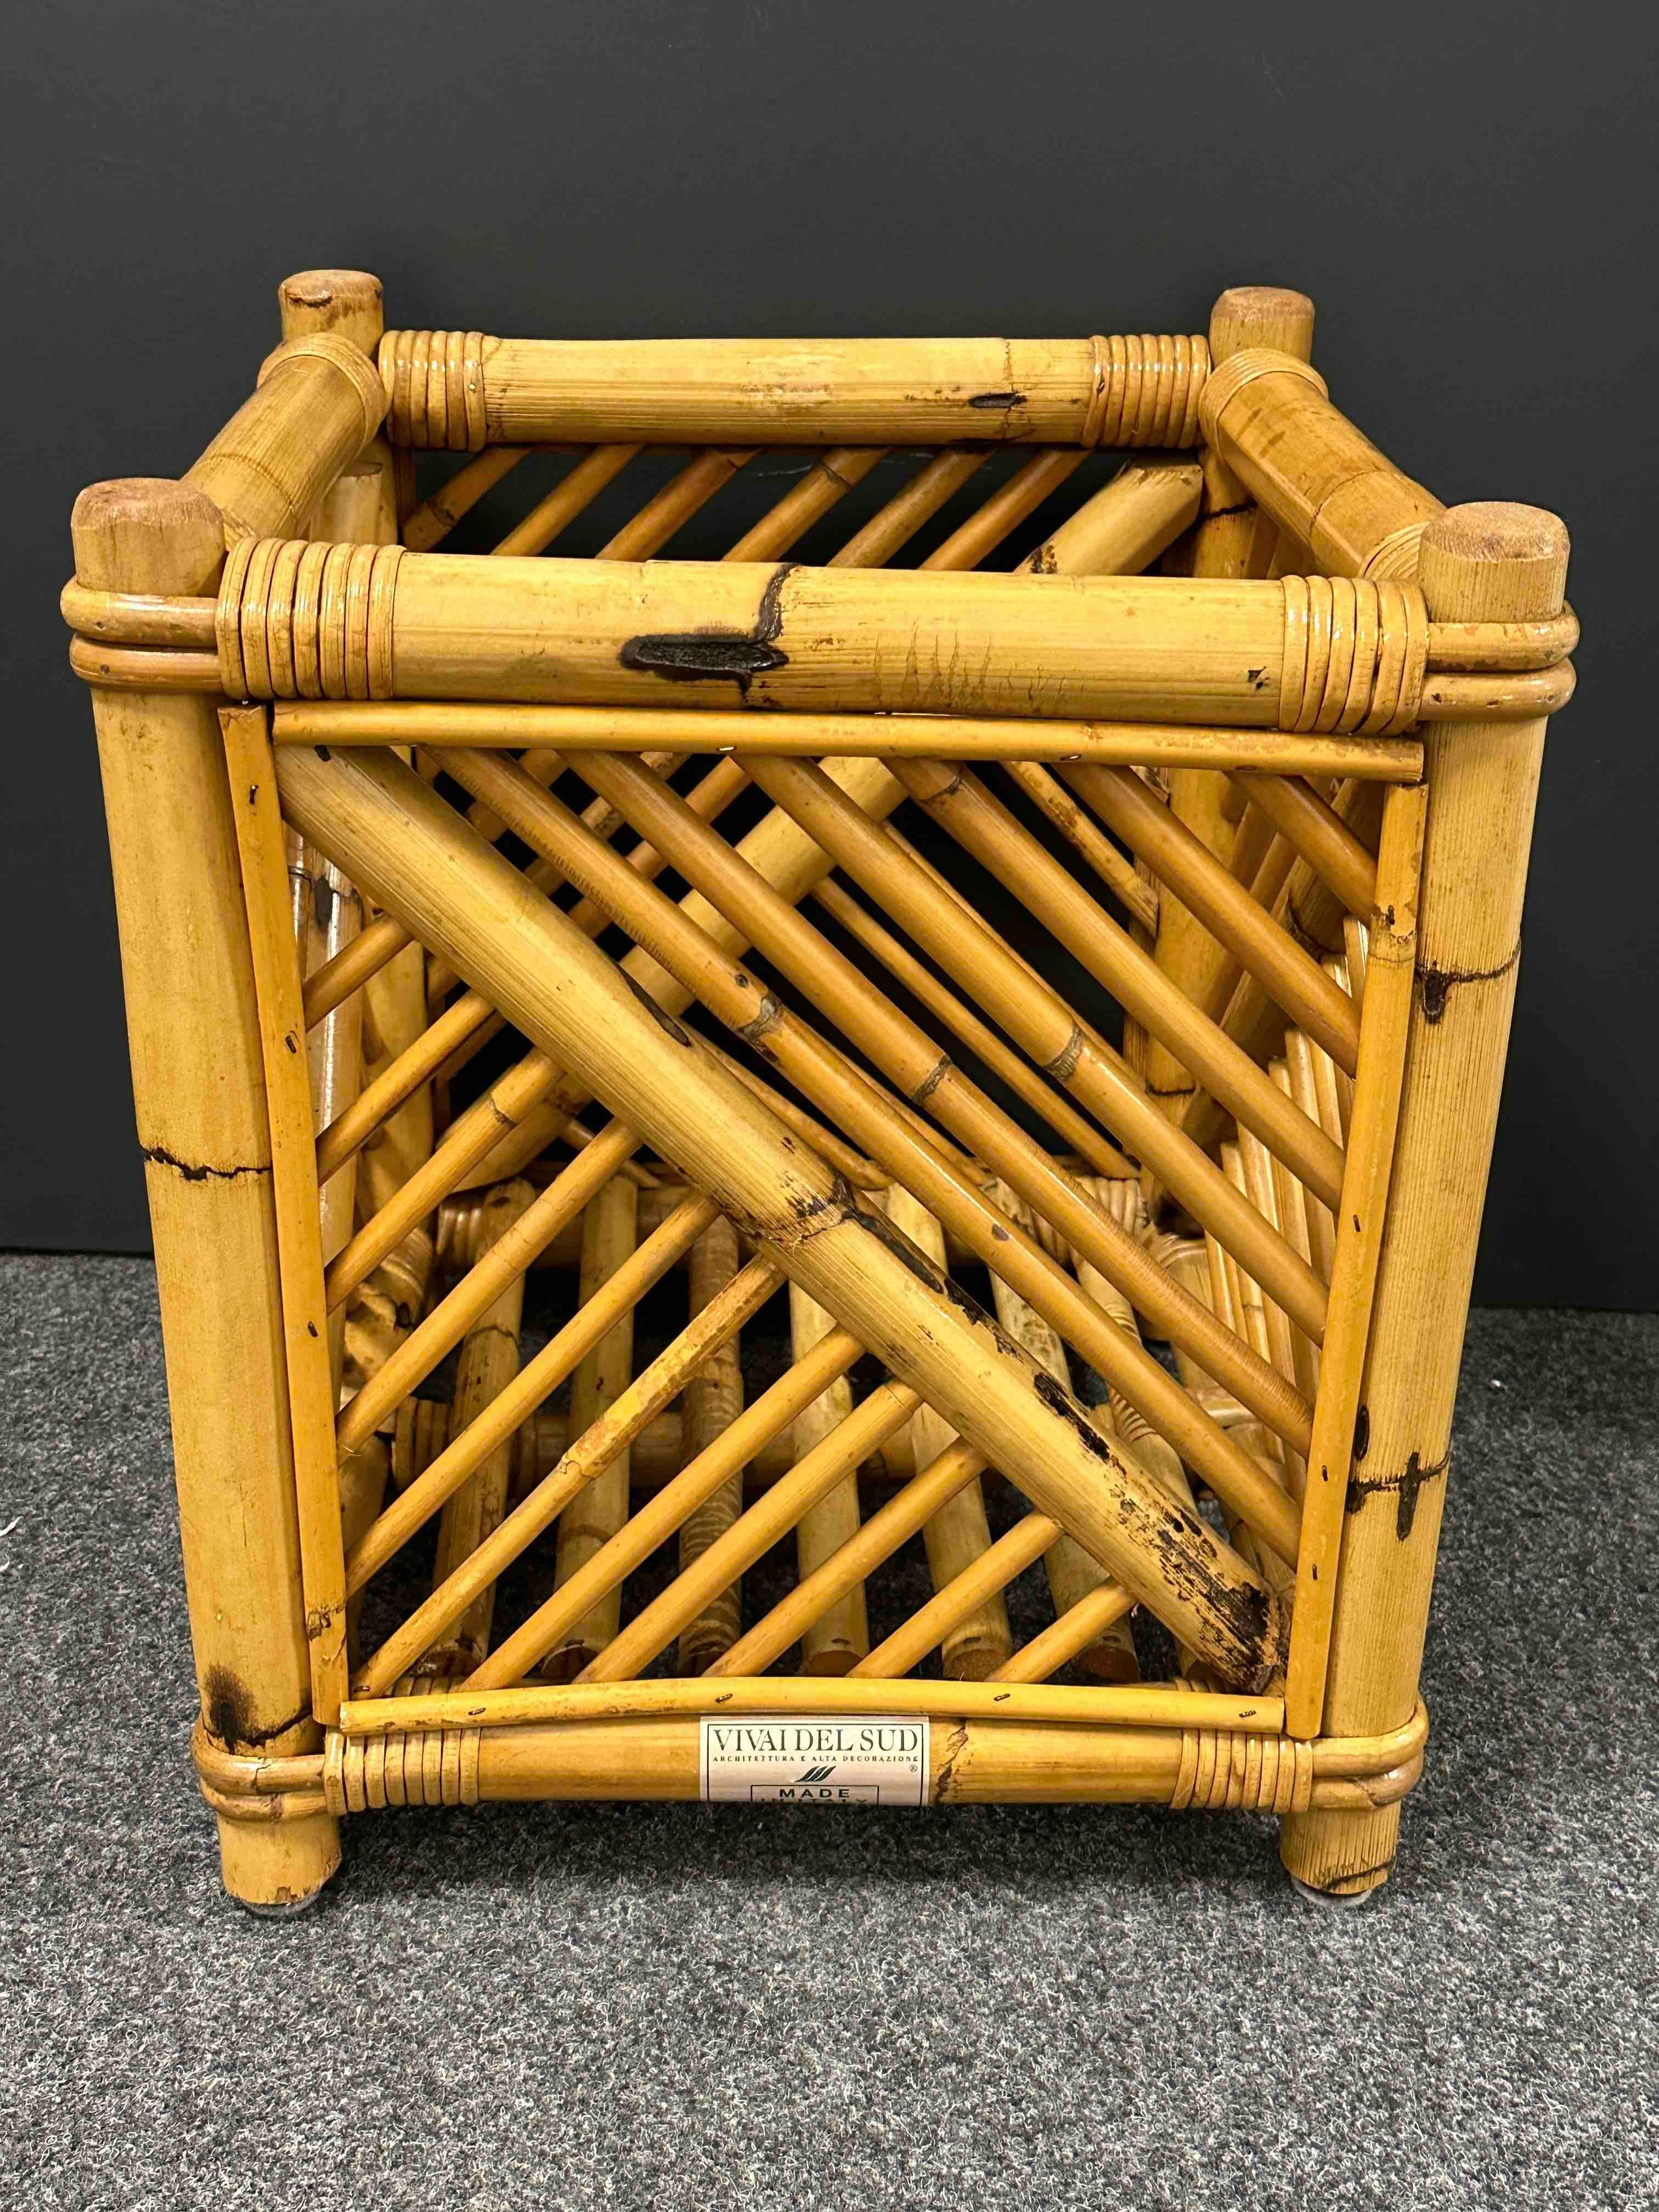 Vivai Del Sud Bamboo Wicker Vintage Pot Cache Plant Holder or Waist Basket 1970s In Good Condition For Sale In Nuernberg, DE